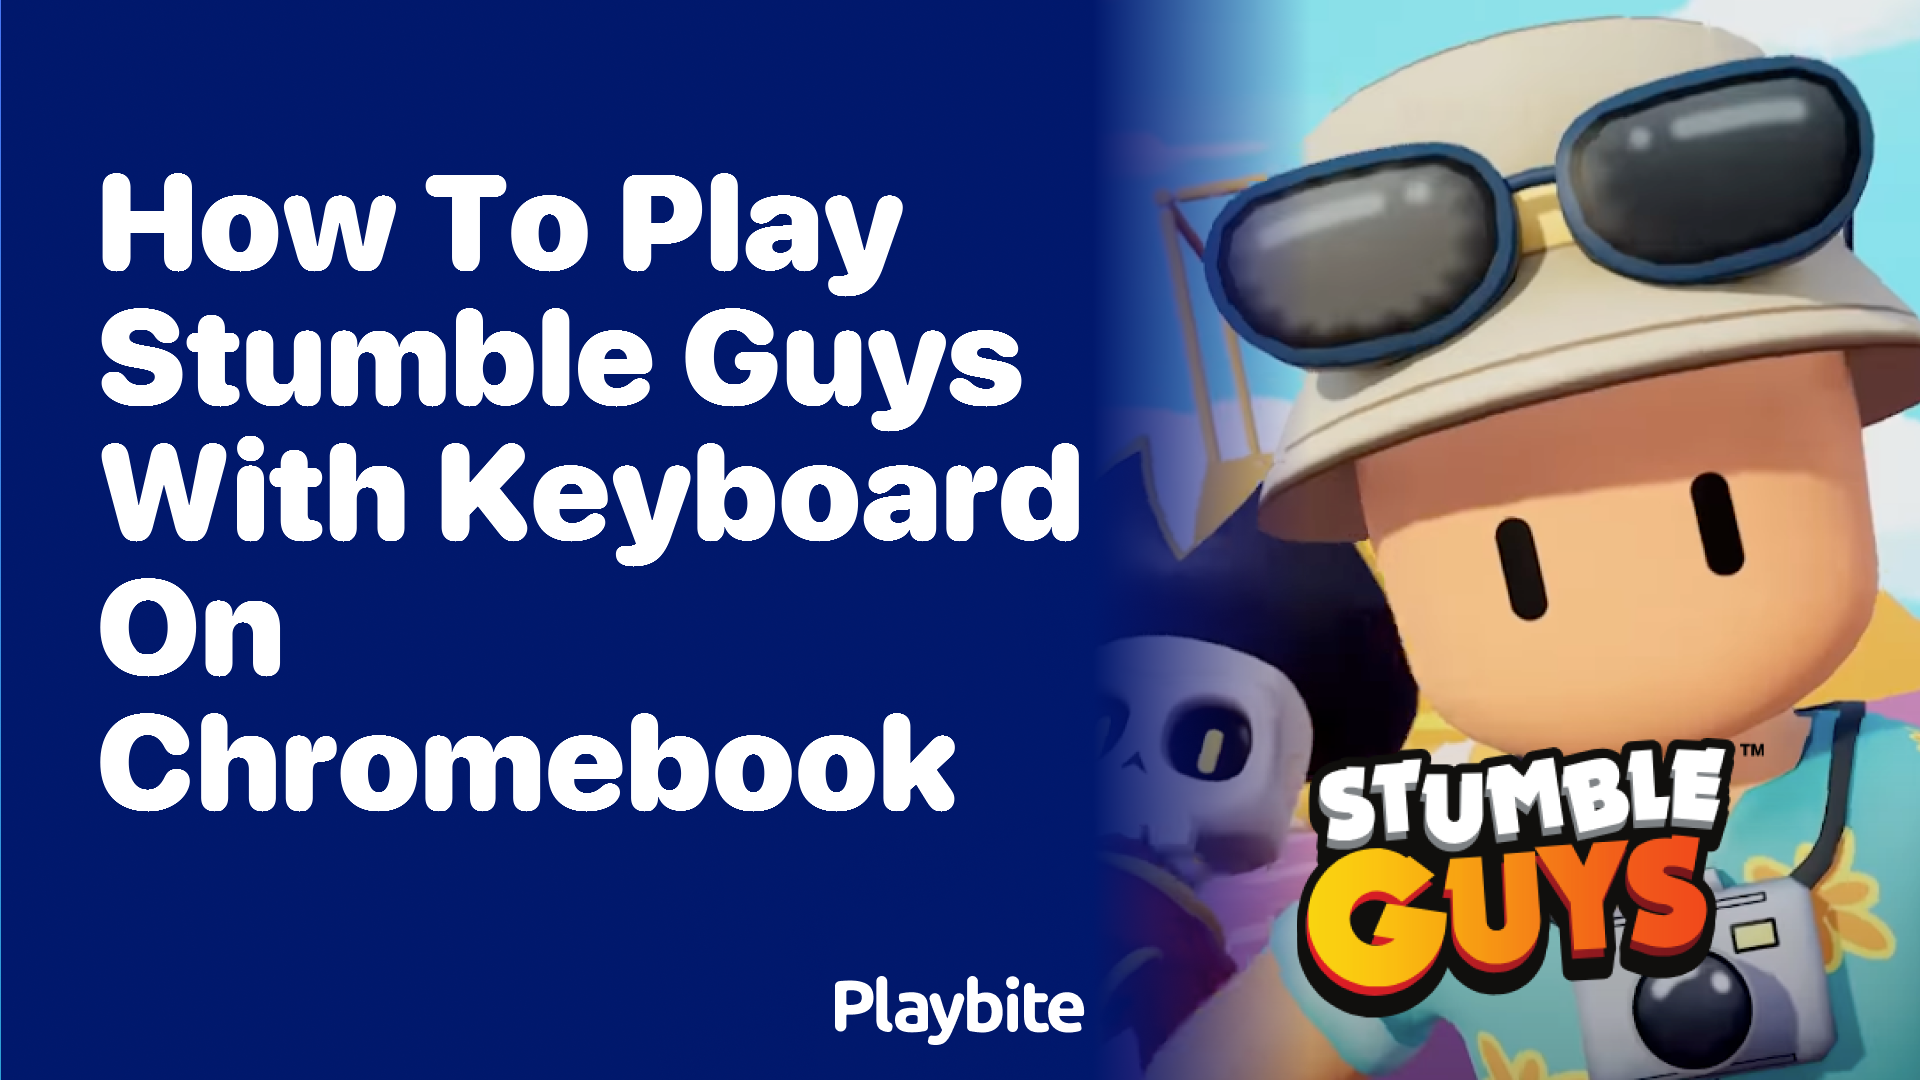 How to Play Stumble Guys with a Keyboard on Chromebook